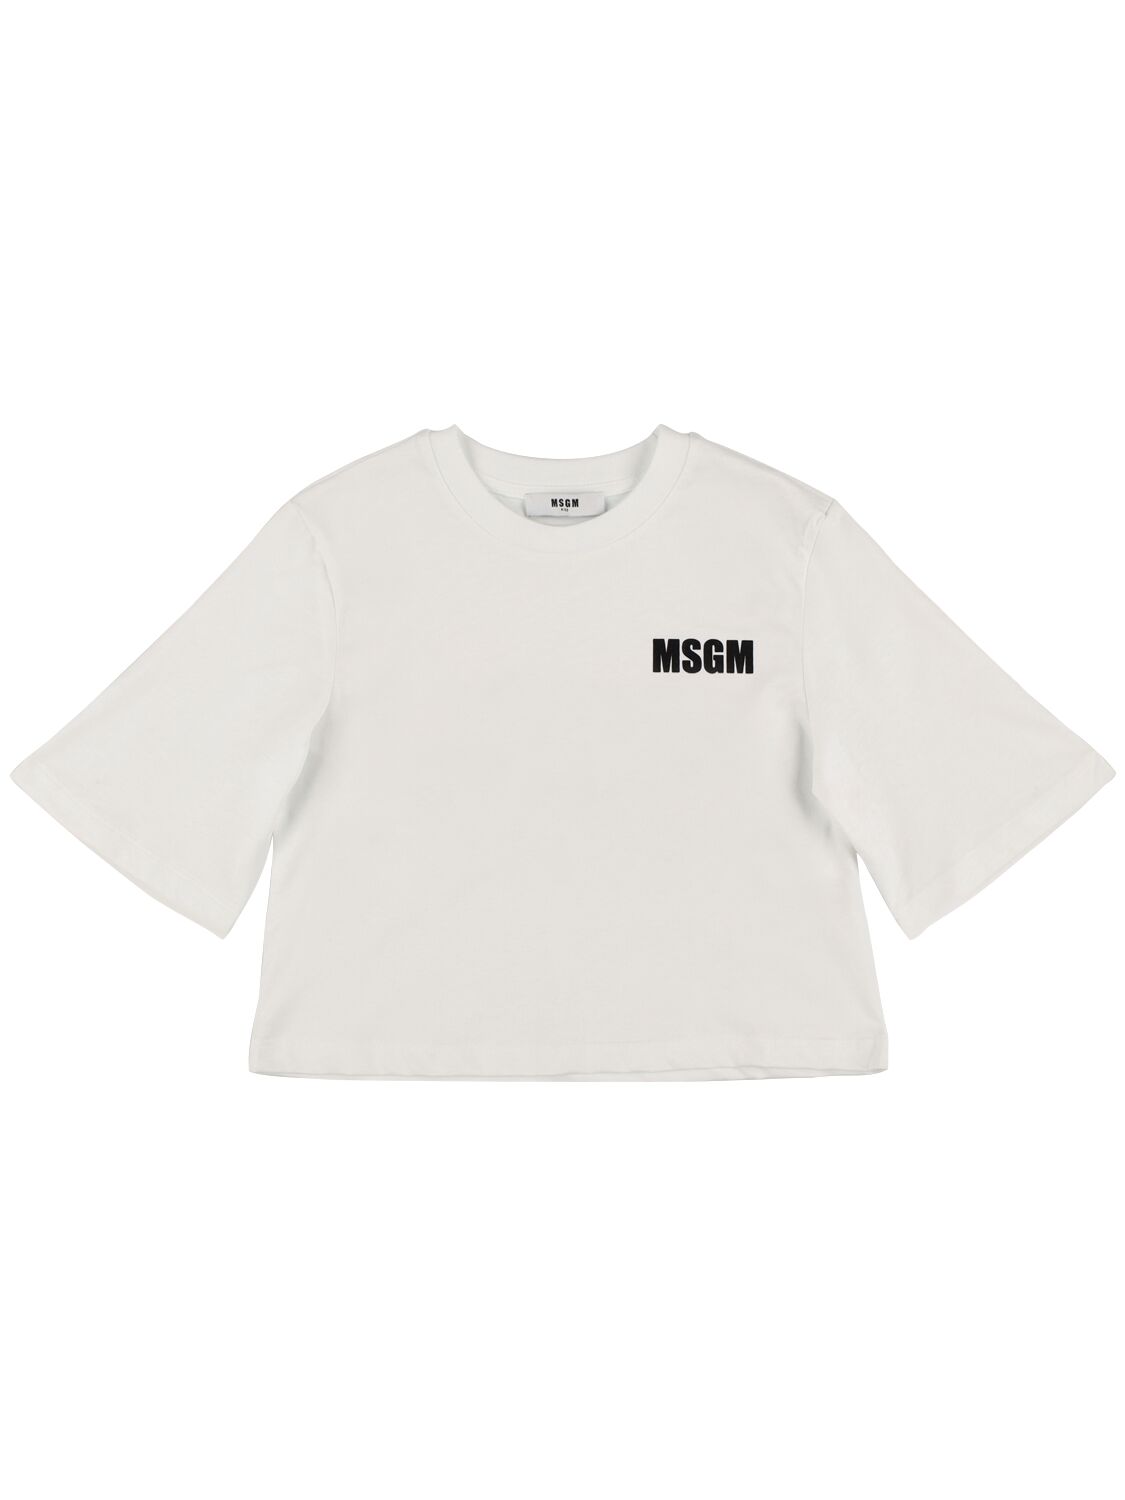 Msgm Kids' Cotton Jersey Cropped T-shirt In White